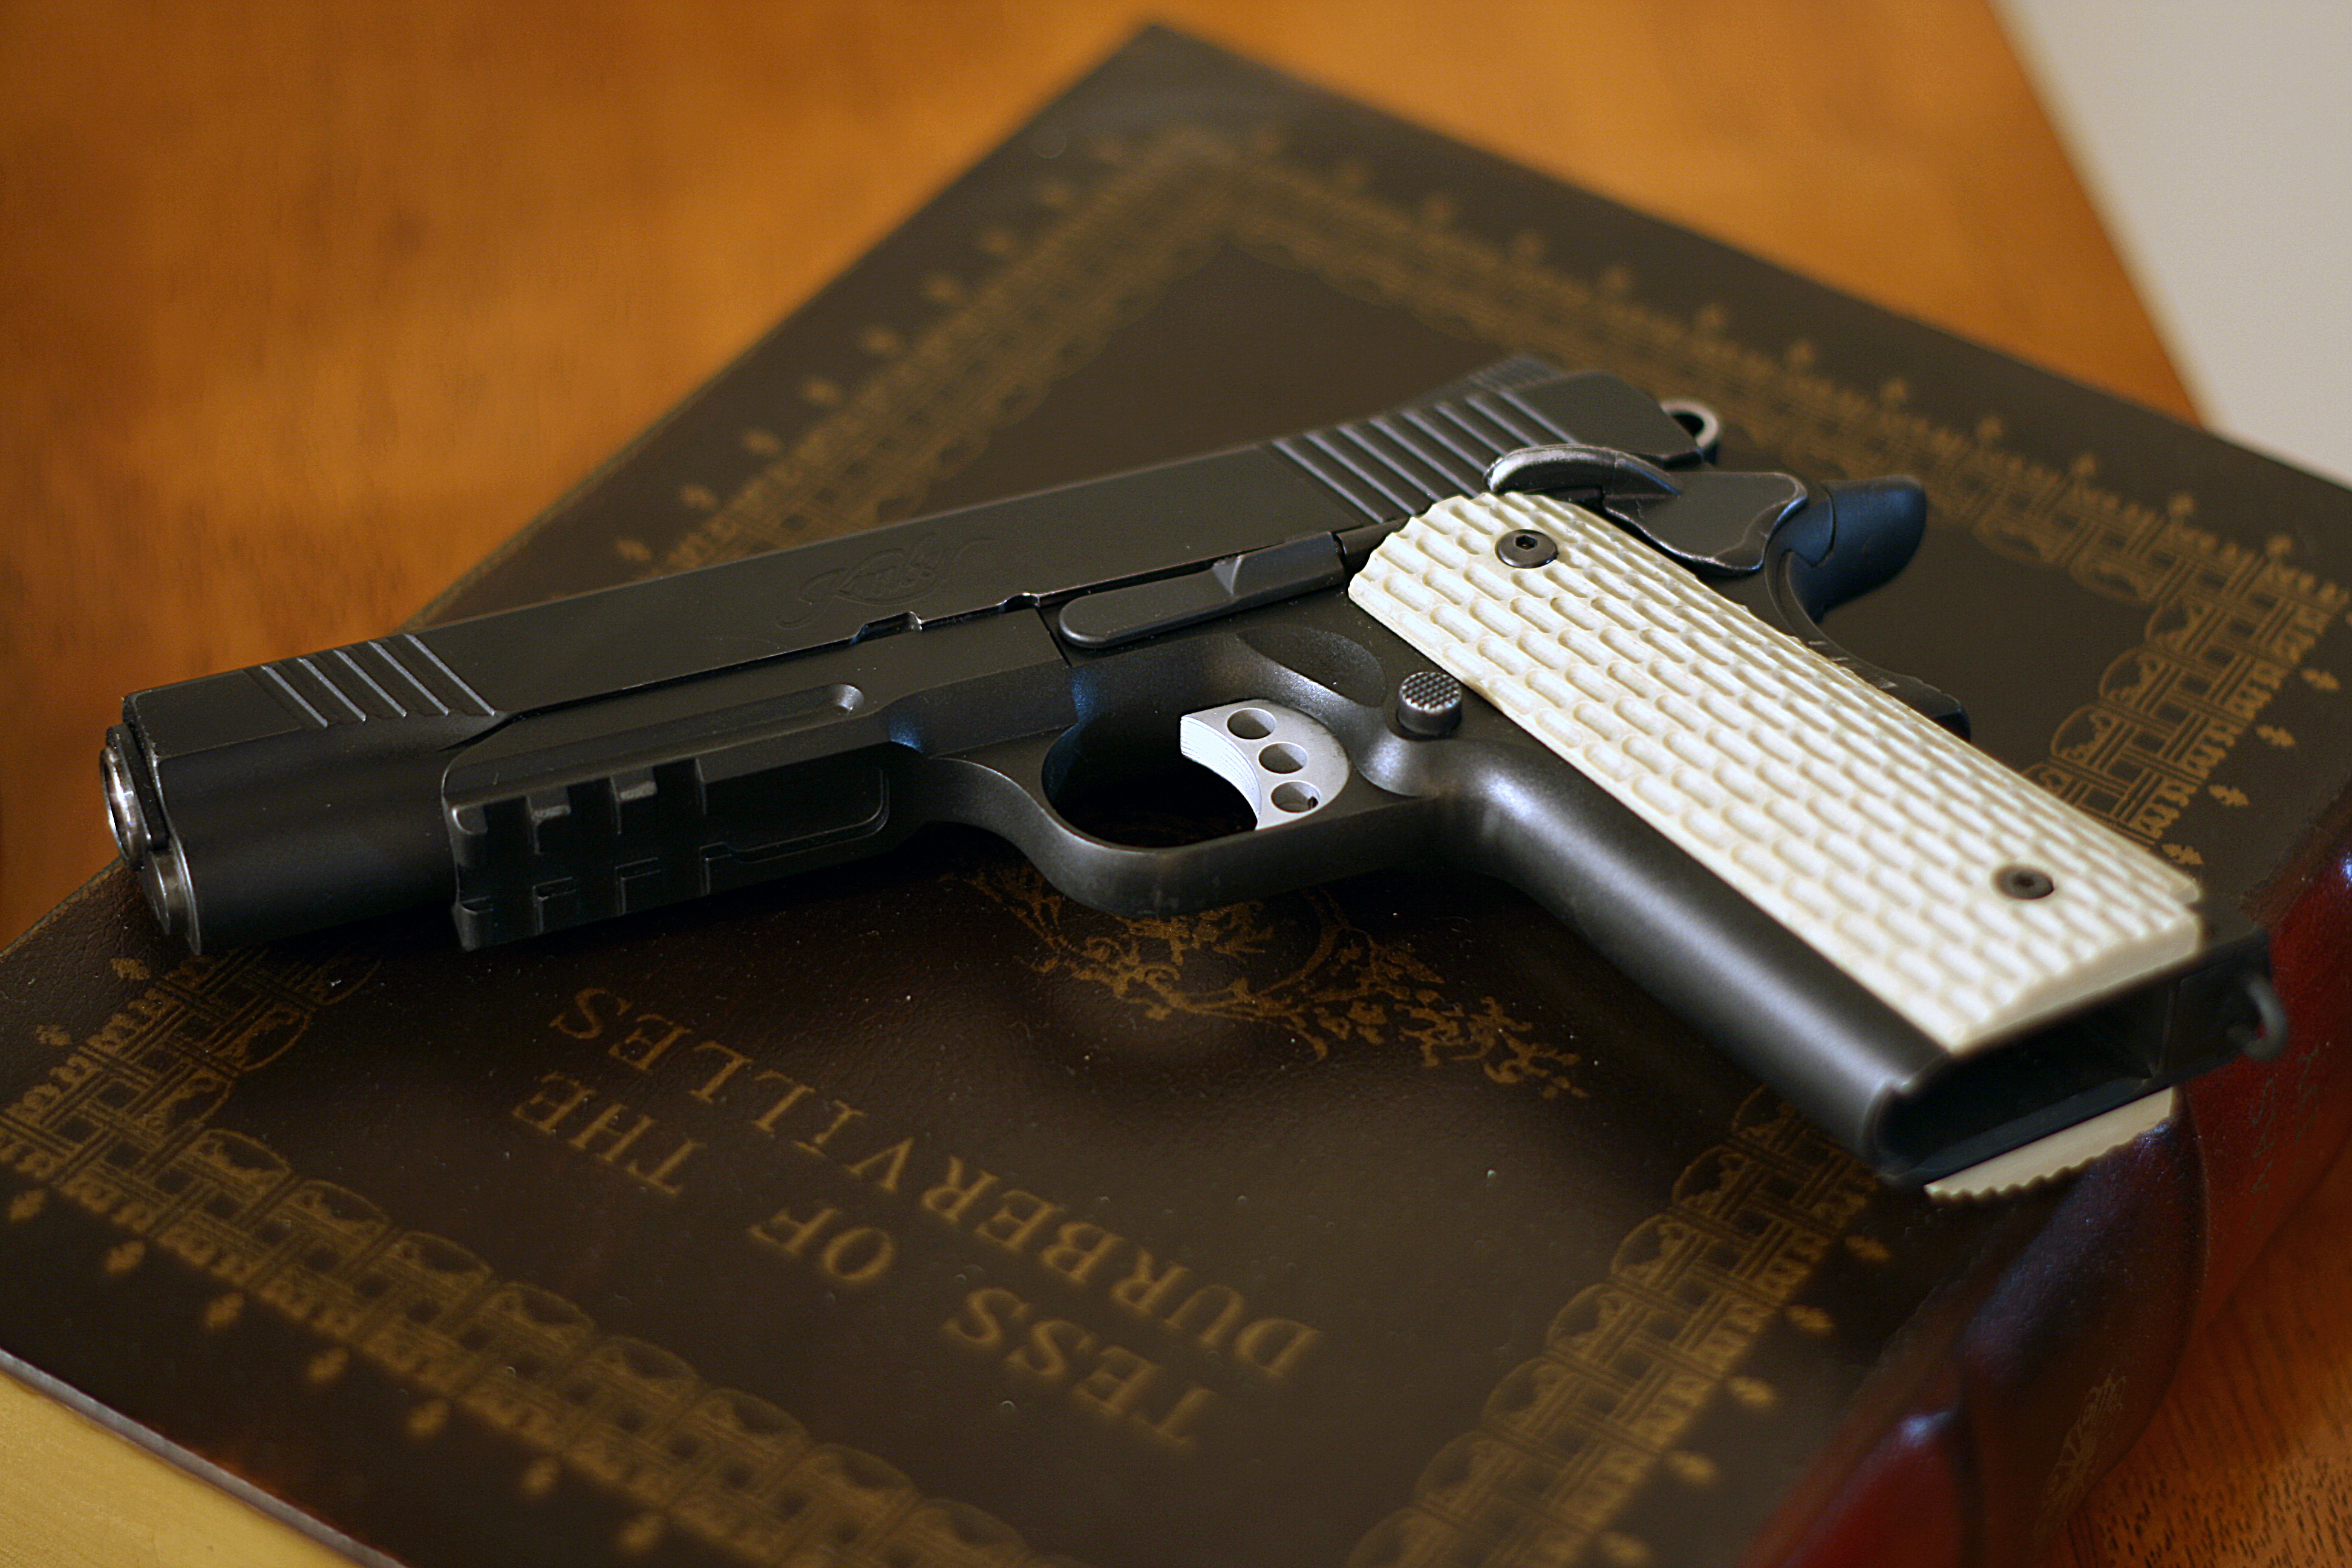  colt 1911 wallpaper http iappsofts com colt 1911 32 acp by manfred 3888x2592